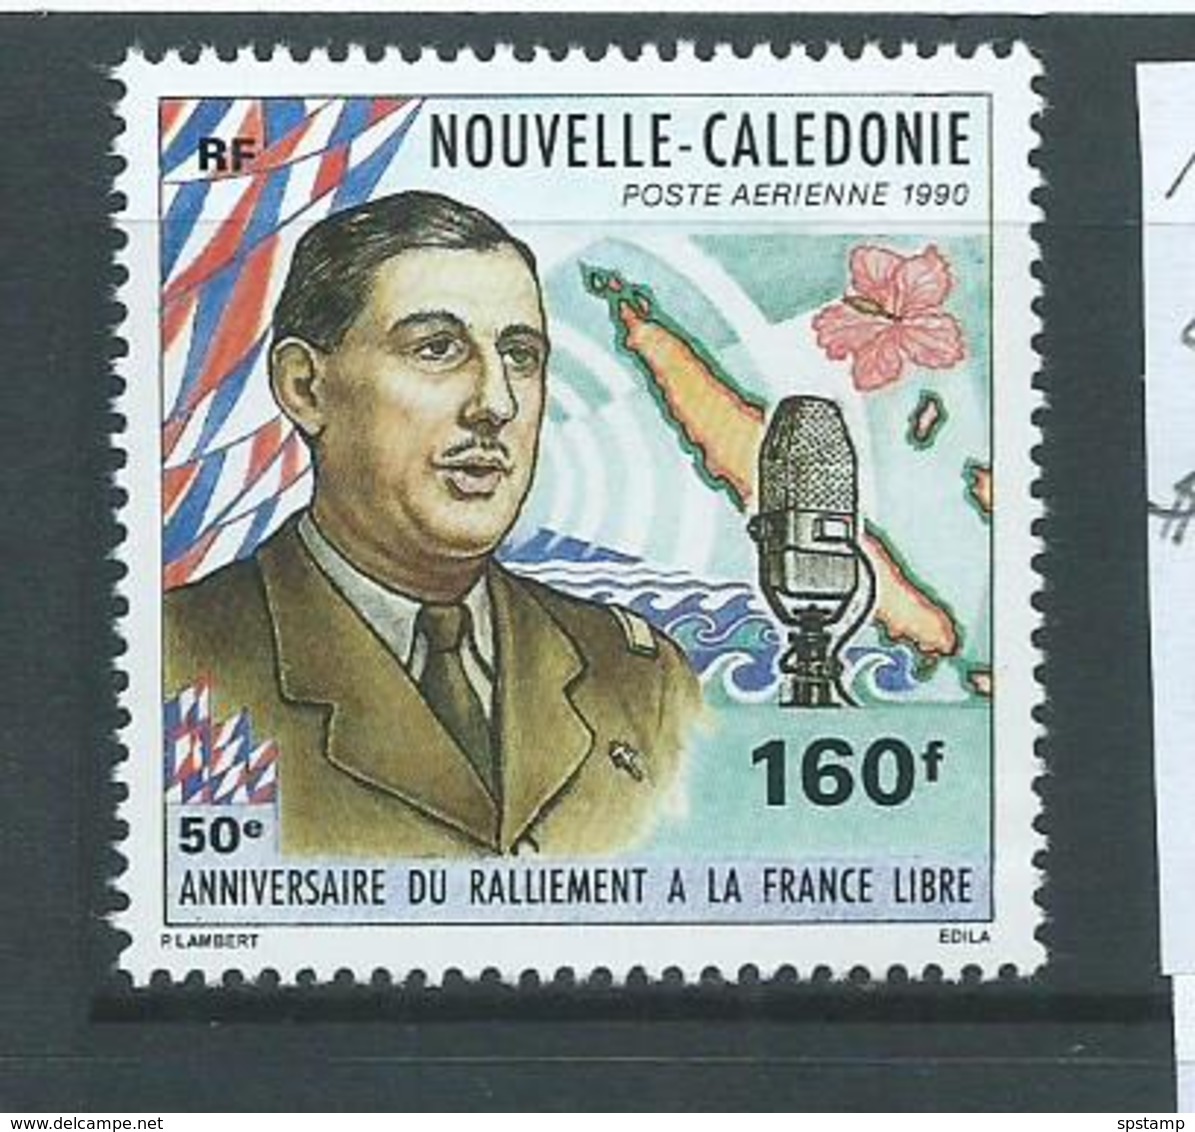 New Caledonia 1990 De Gaulle France Libre Anniversary 160 Fr Single MNH , Gum Creasing - Unused Stamps